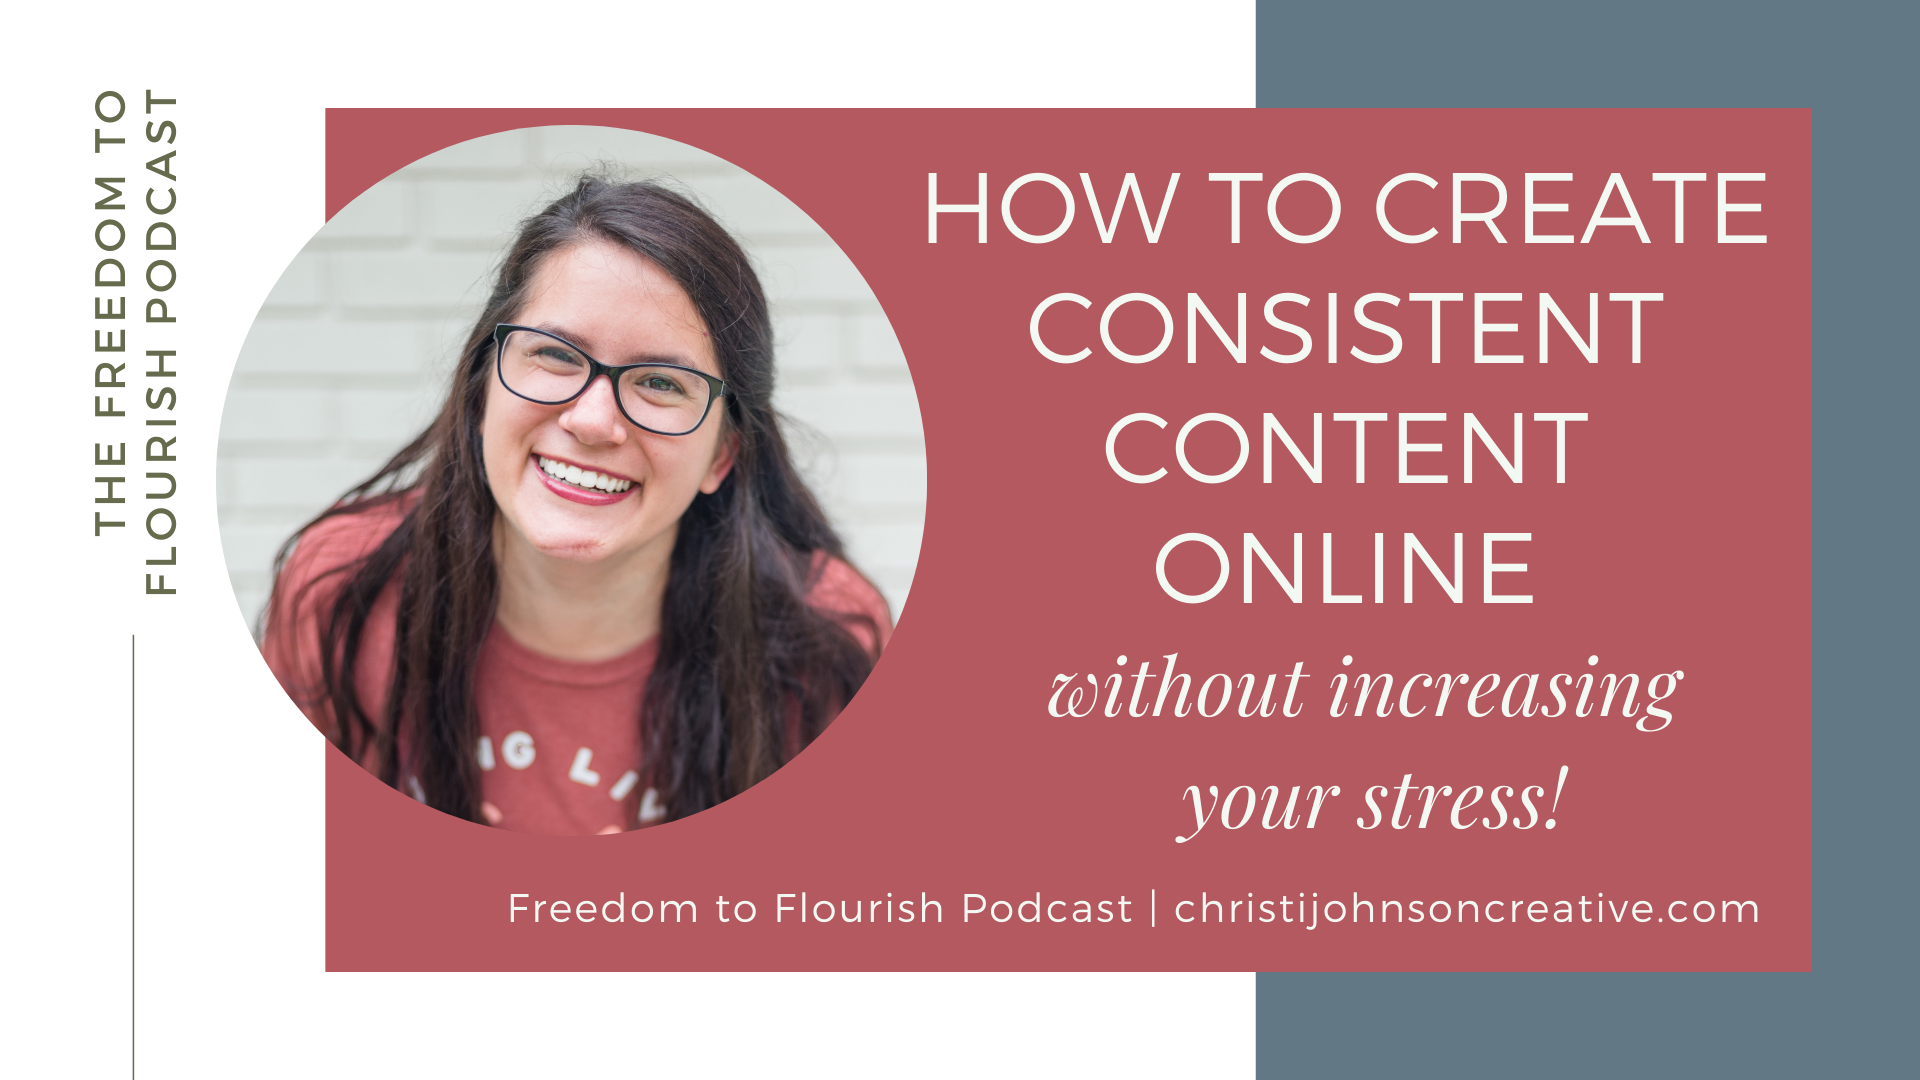 how to create consistent content online without increasing stress